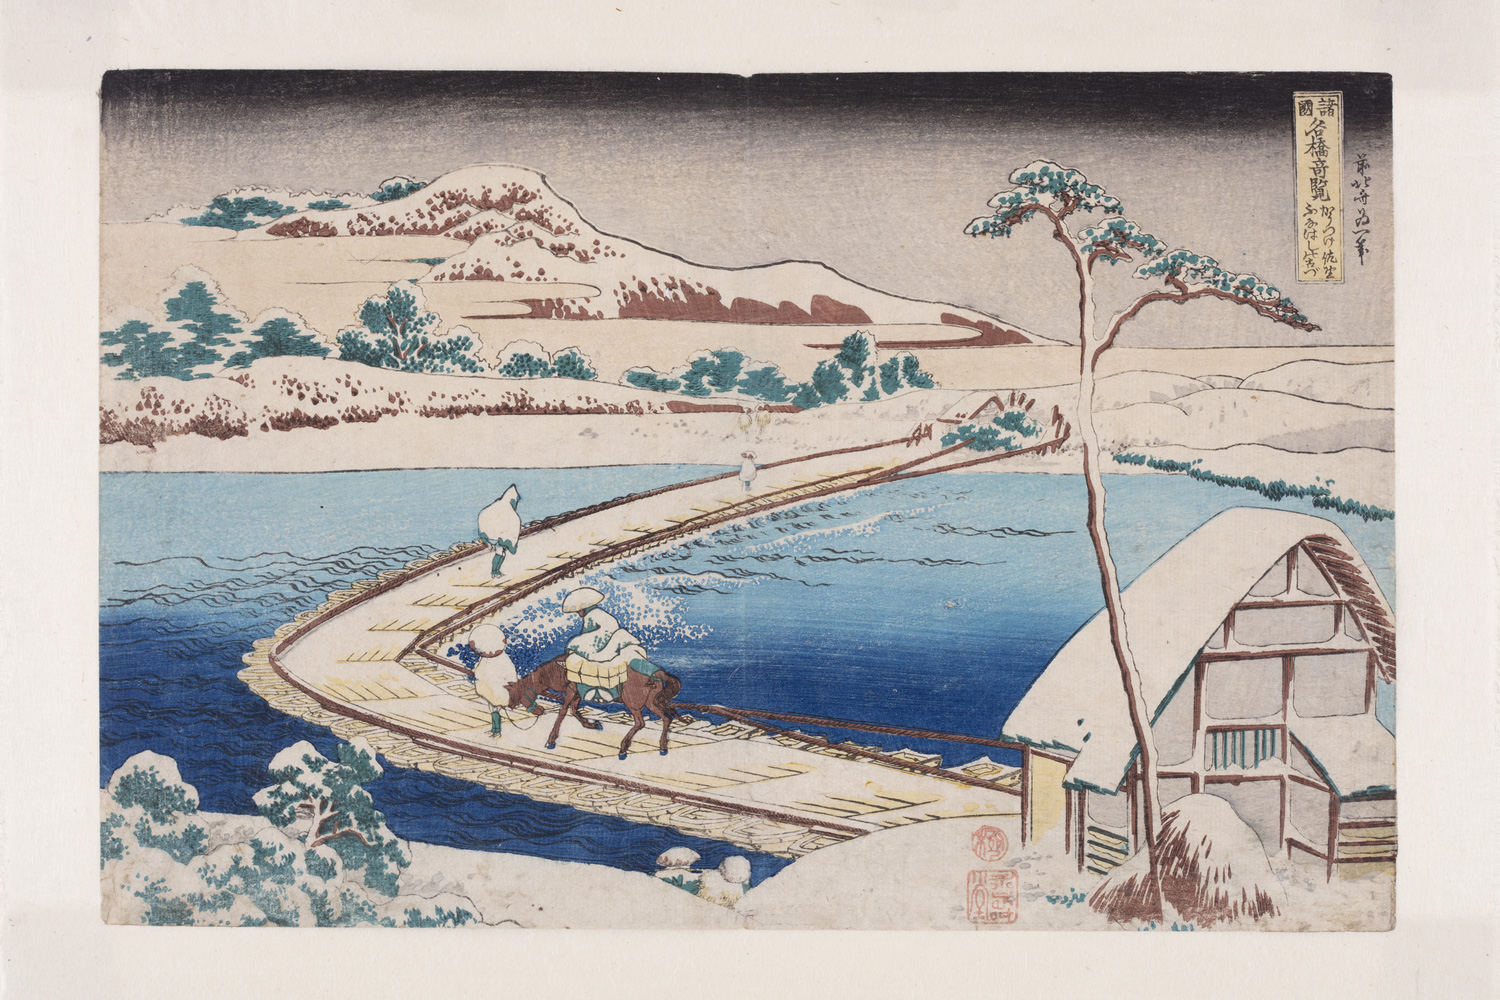 Japanese print of a landscape. a pontoon bridge crosses the marshes. Travellers cross the bridge, one riding a horse, others walking. In the foreground is a building and in the background a mountain rises up.